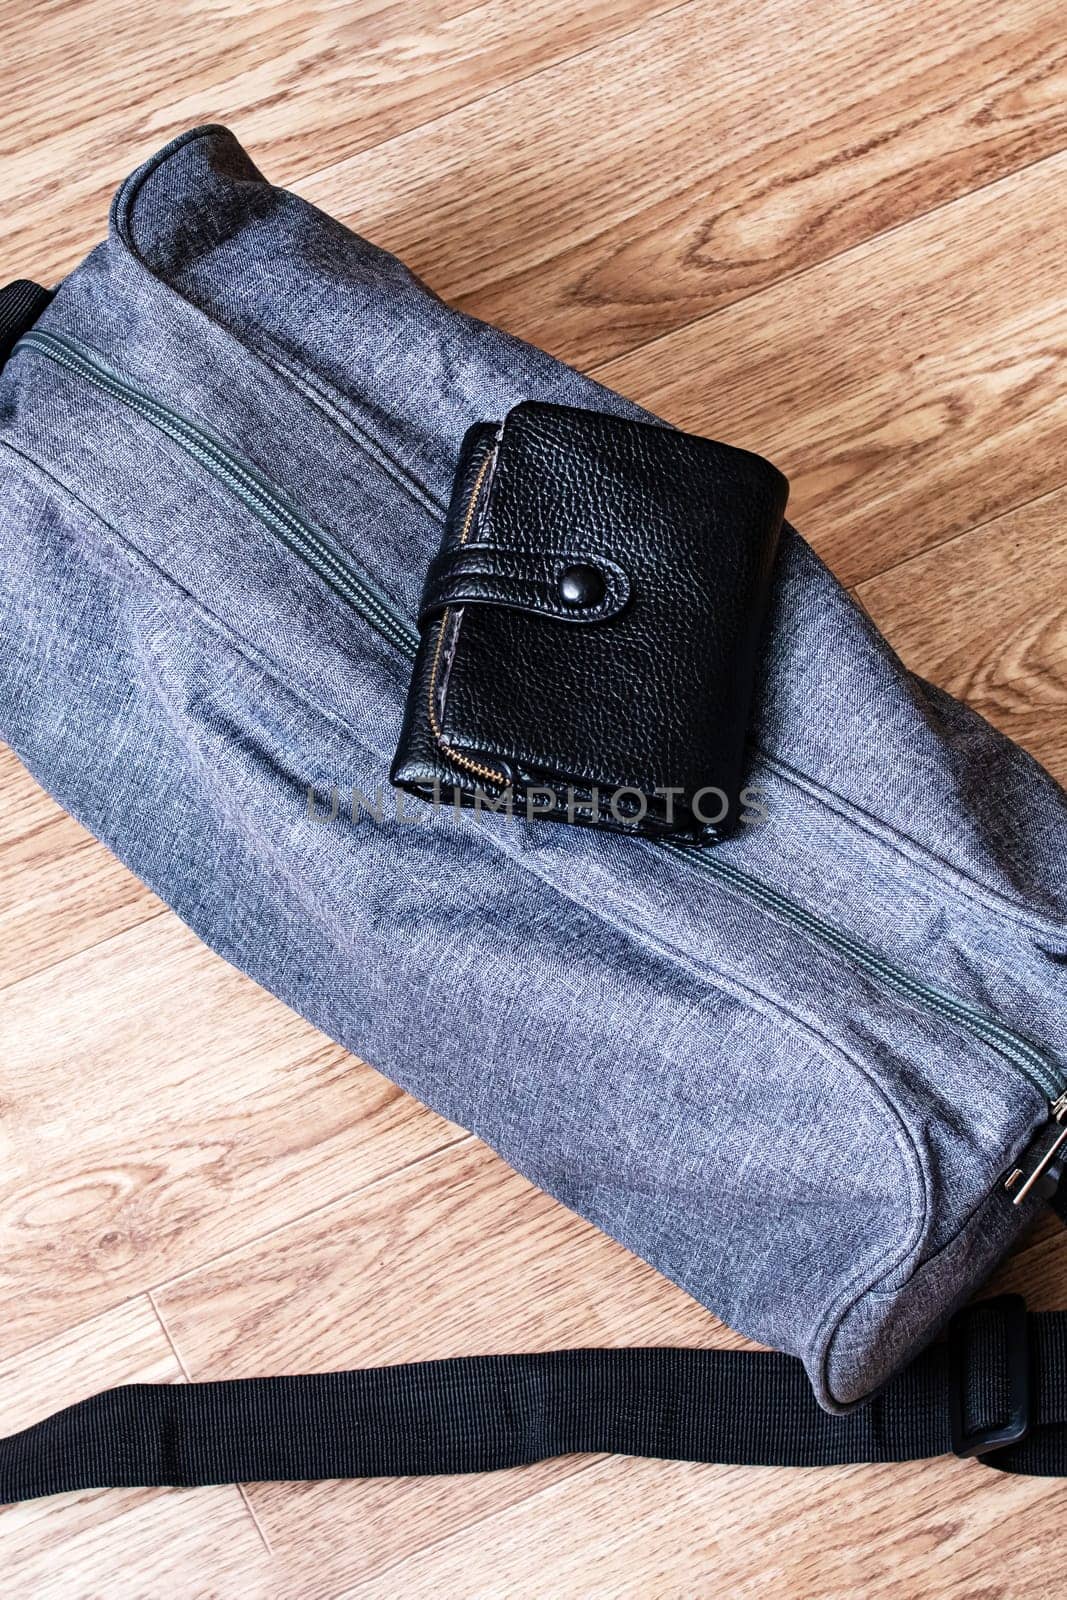 Wallet and travel bag on a wooden background